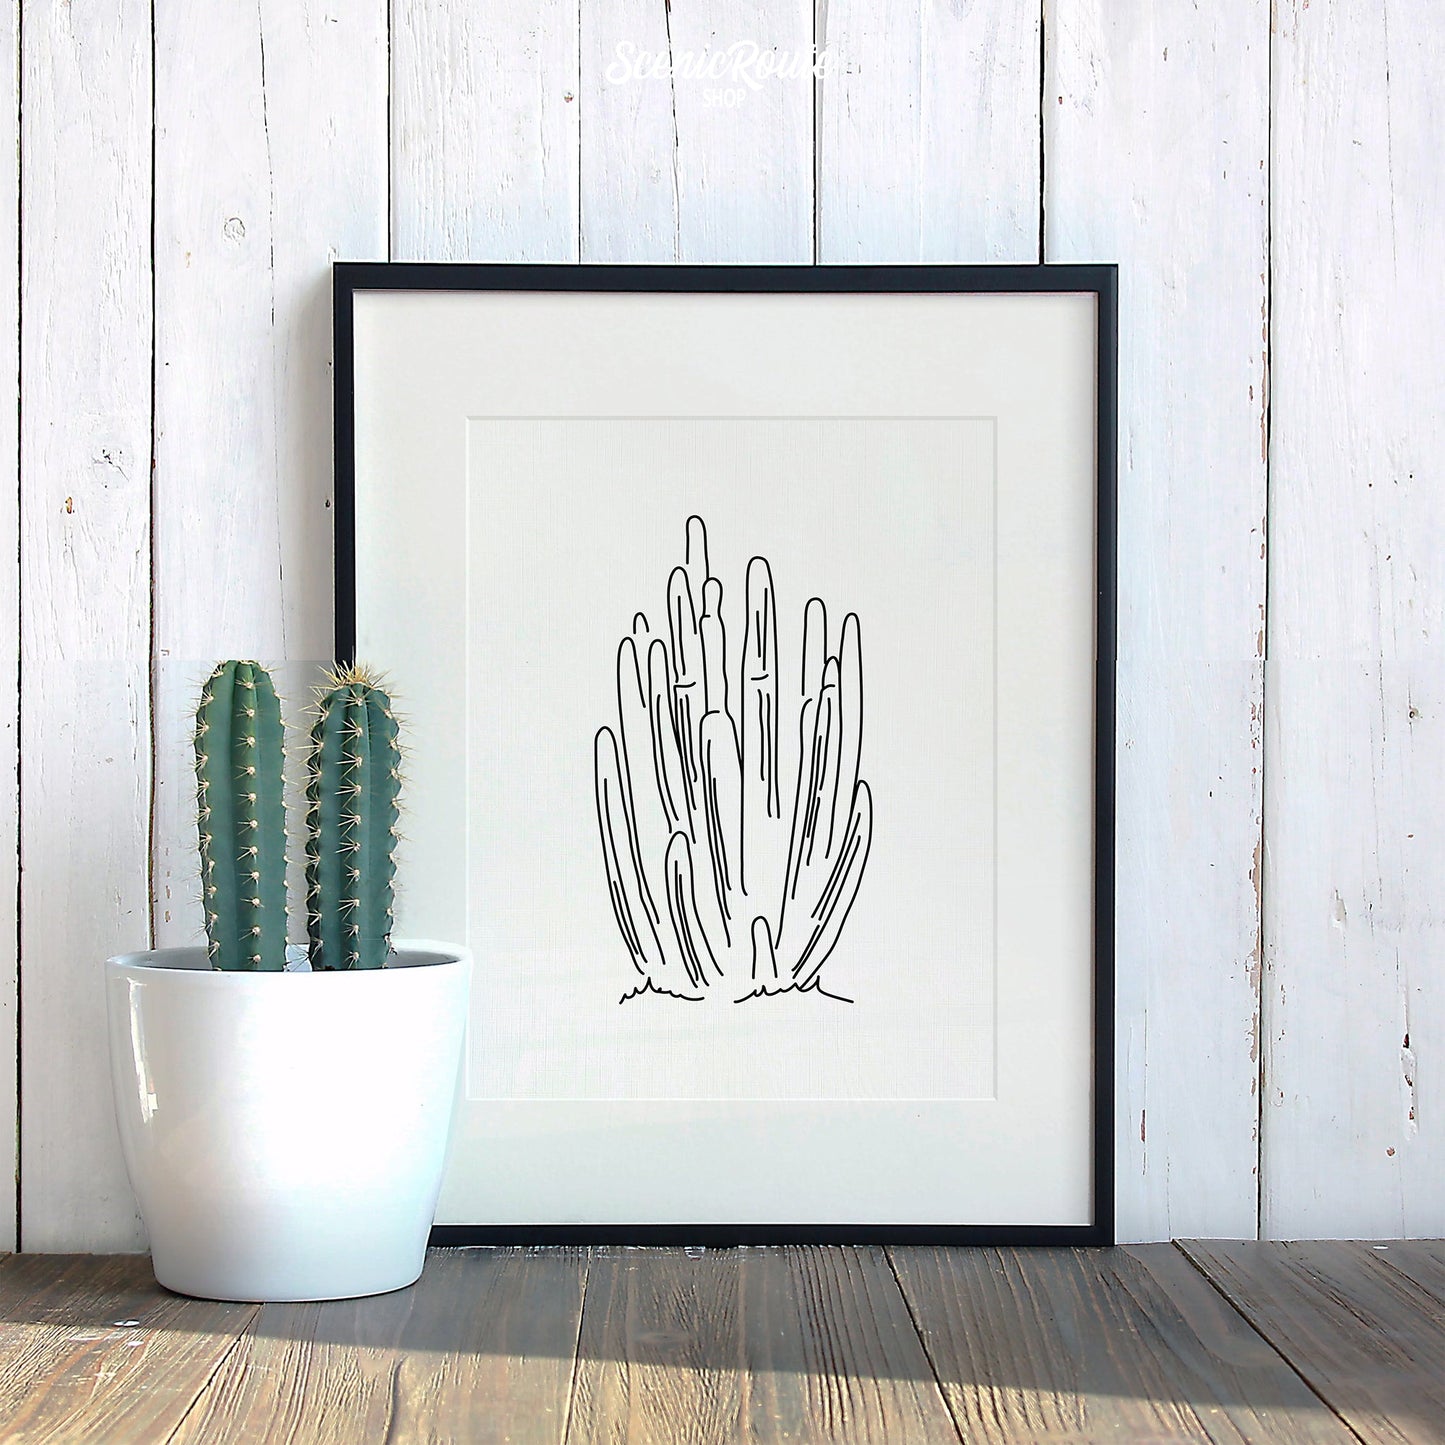 A framed line art drawing of a Organ Pipe Cactus leaning against a wood wall with a cactus